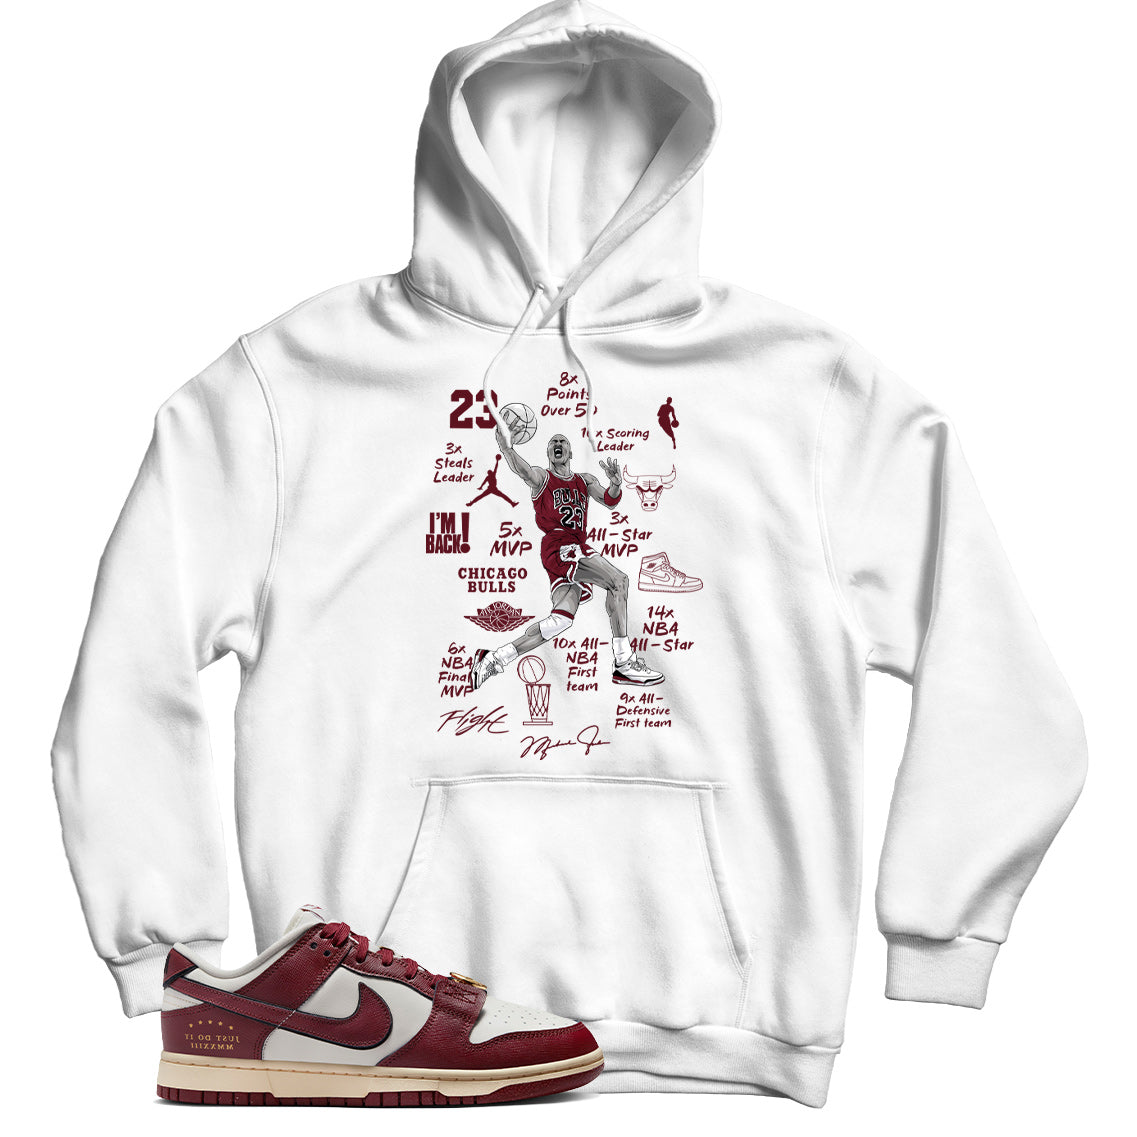 Nike Dunk Low Just Do It Sail Team Red hoodie